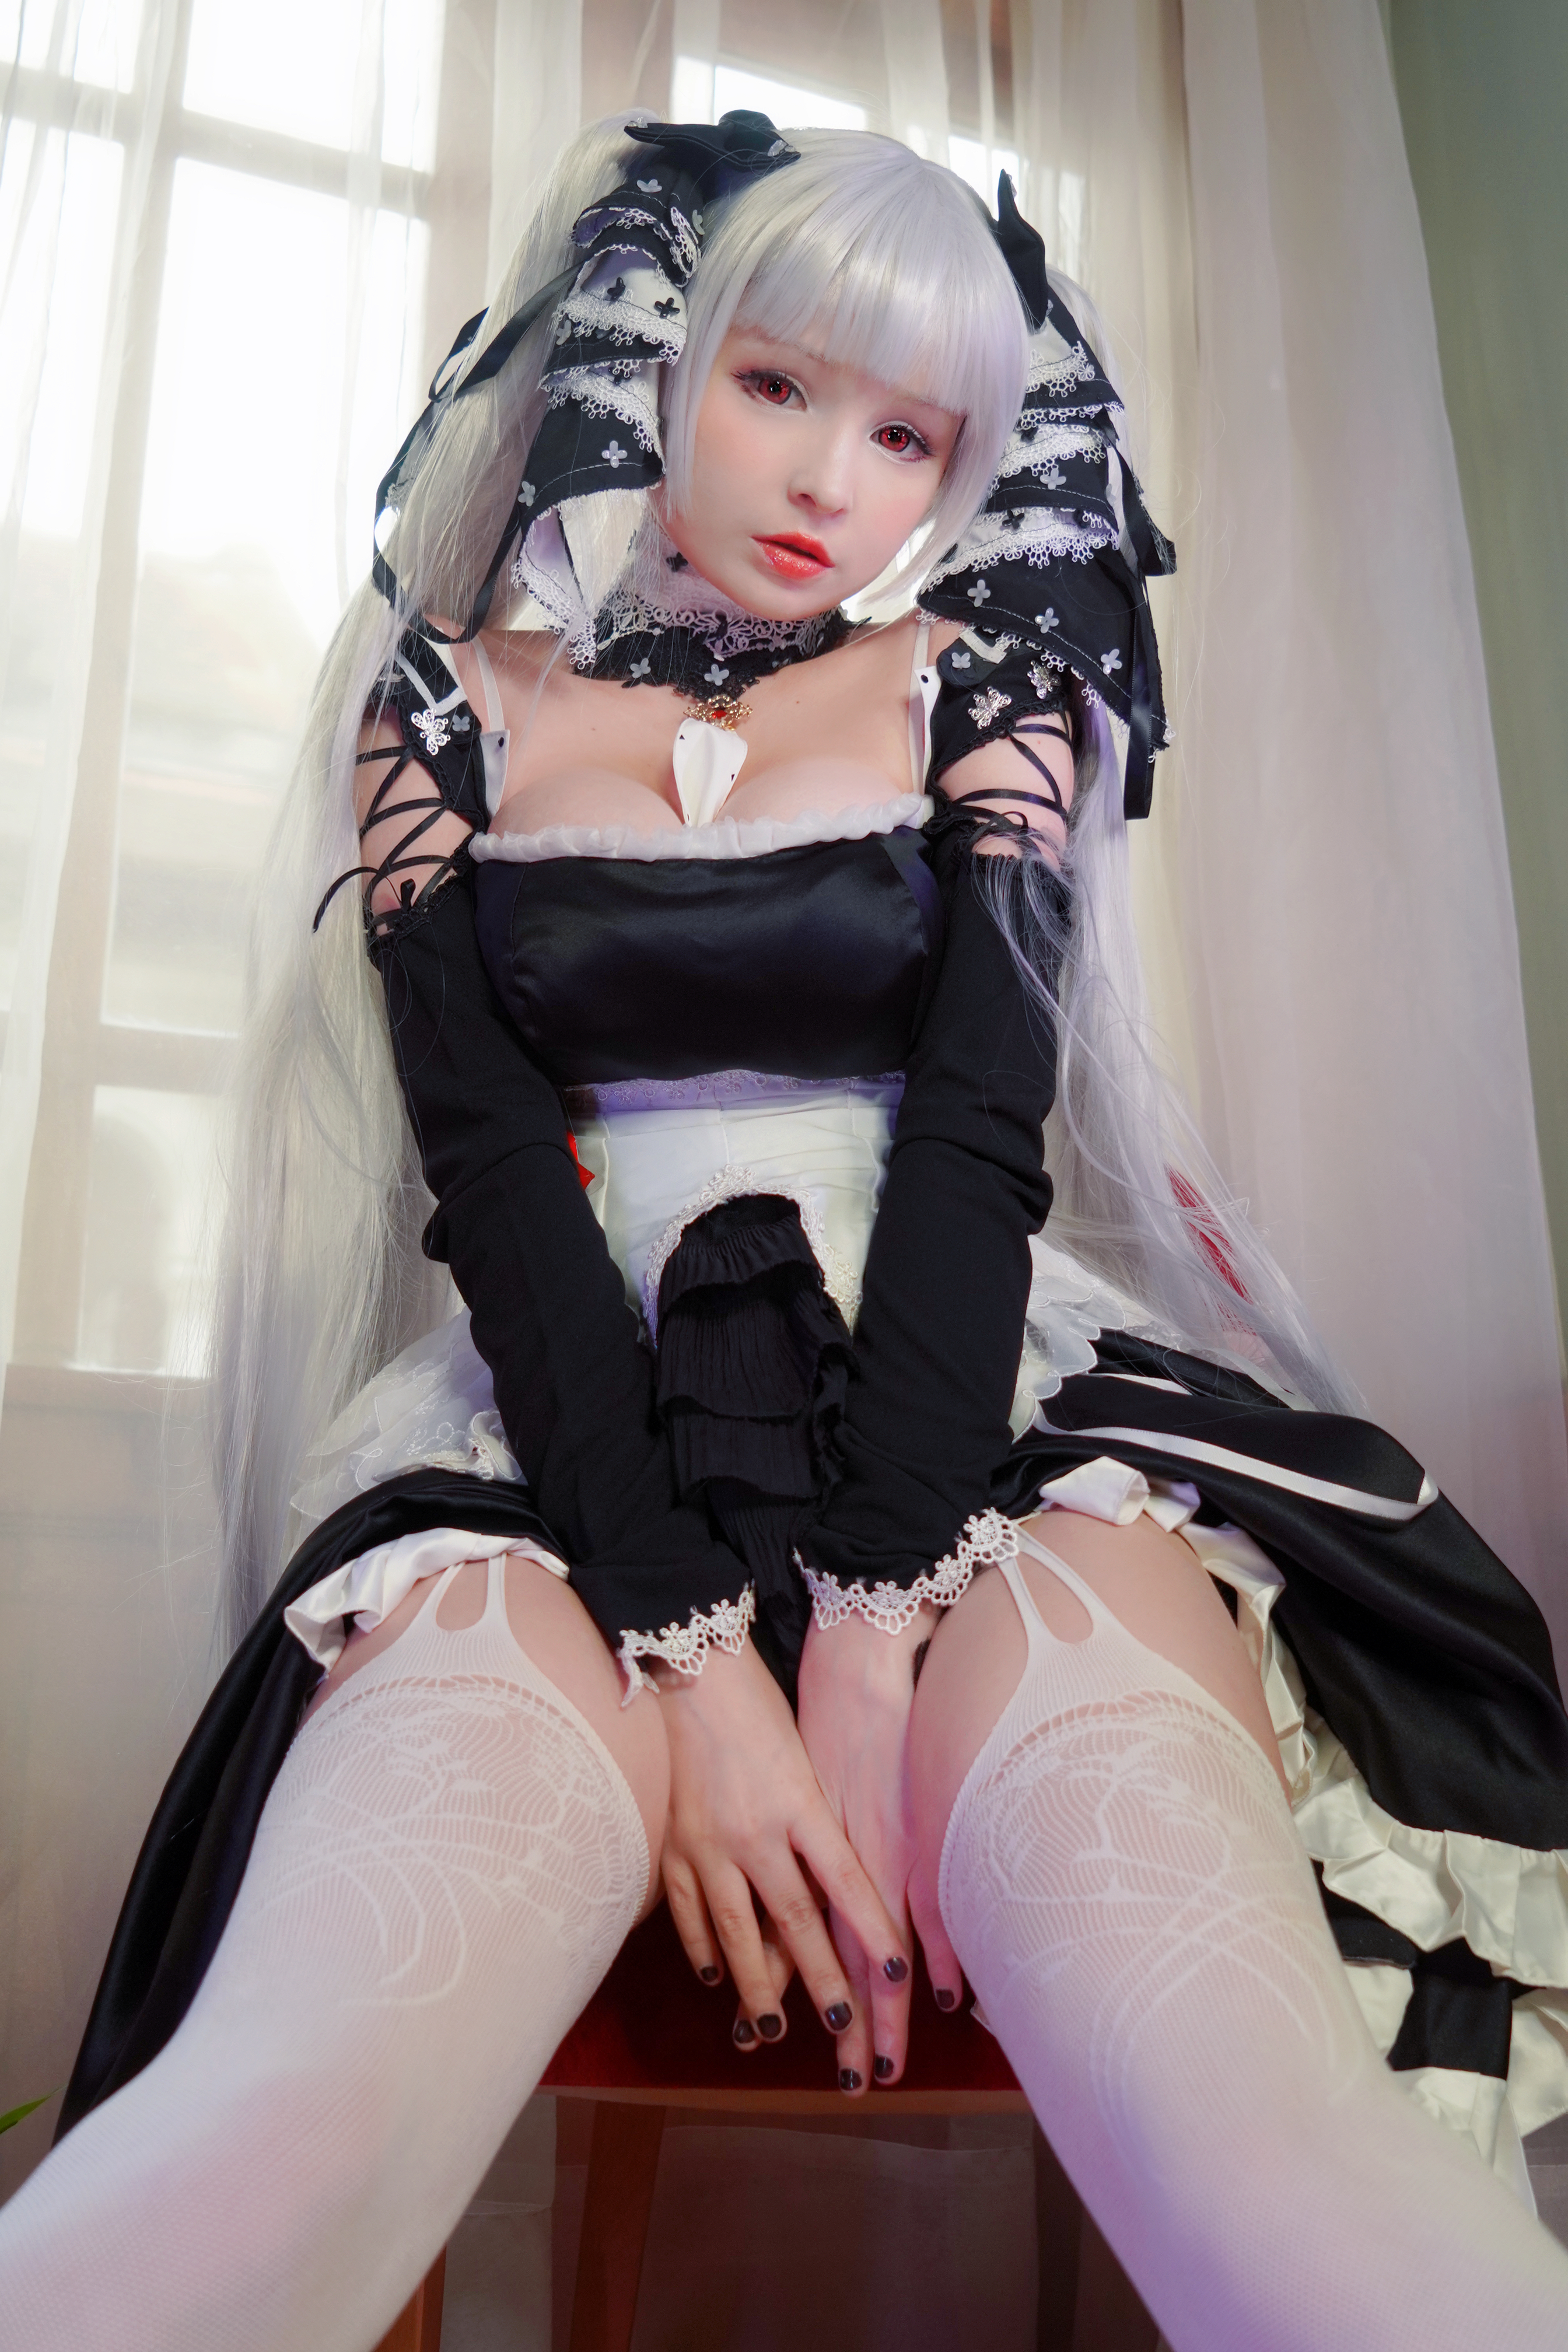 People 2688x4032 Hidori Rose women model cosplay Formidable (Azur Lane) Azur Lane video games video game girls dress looking at viewer parted lips red eyes cleavage lingerie stockings white stockings garter straps sitting portrait display indoors women indoors maid outfit thighs lifting dress